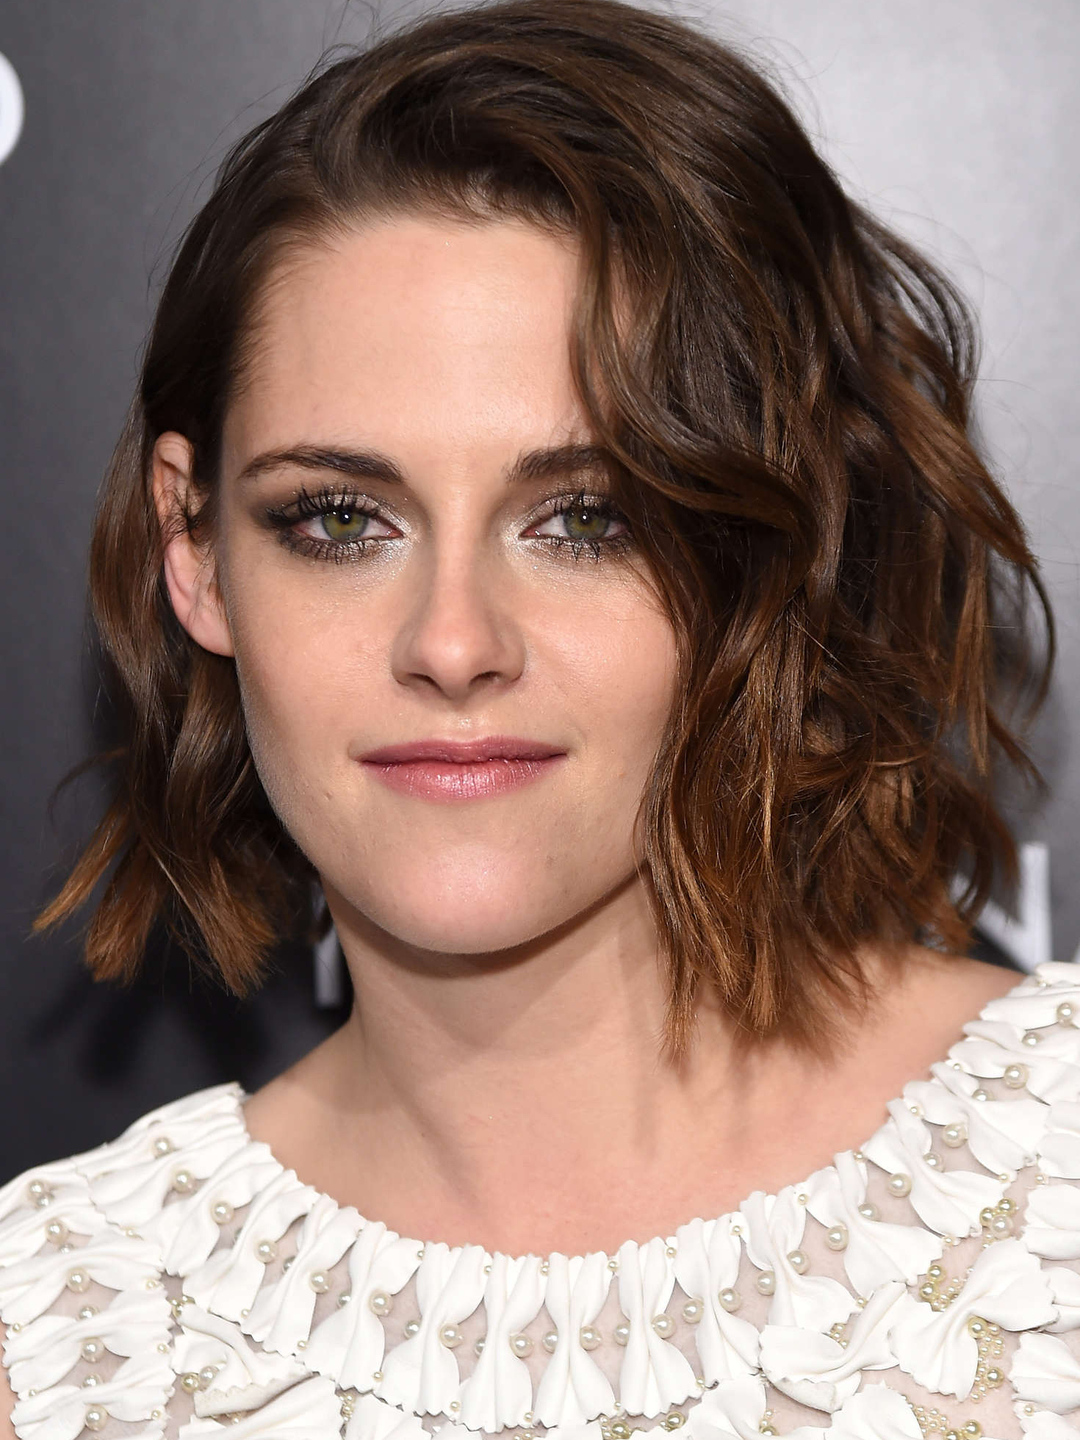 Kristen Stewart how did she became famous